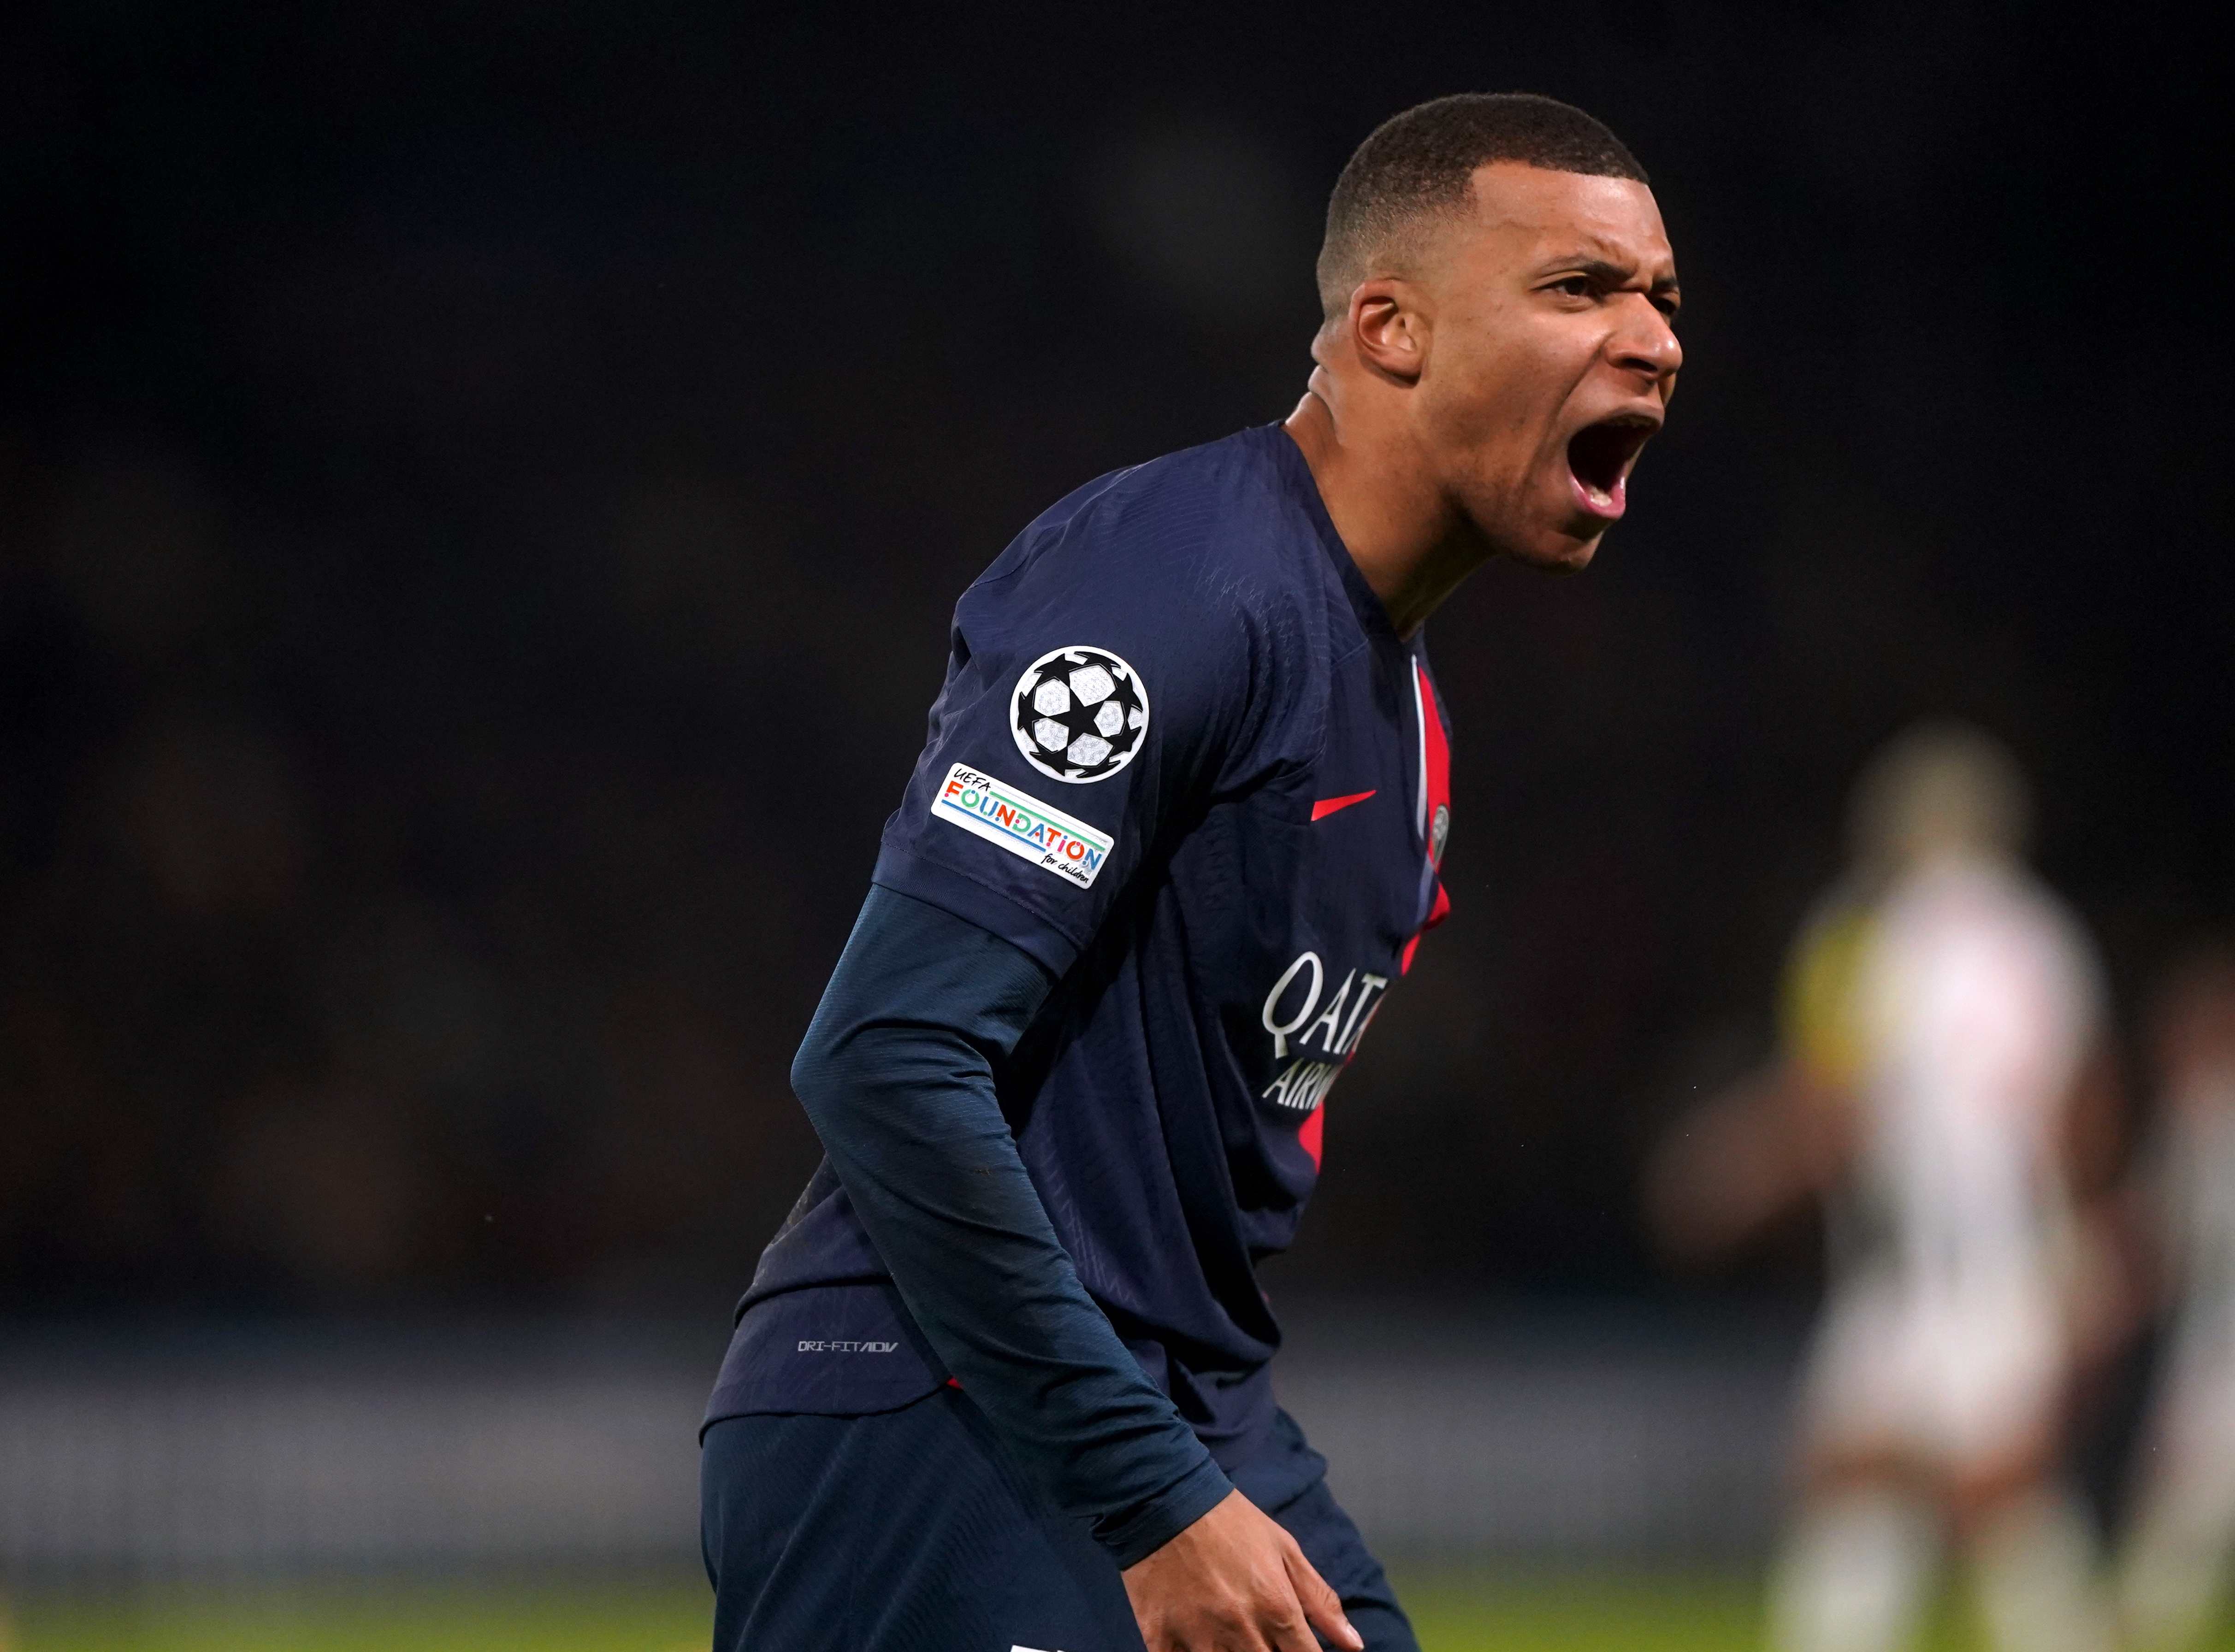 Arsenal have been linked with an audacious move for Paris St Germain’s Kylian Mbappe